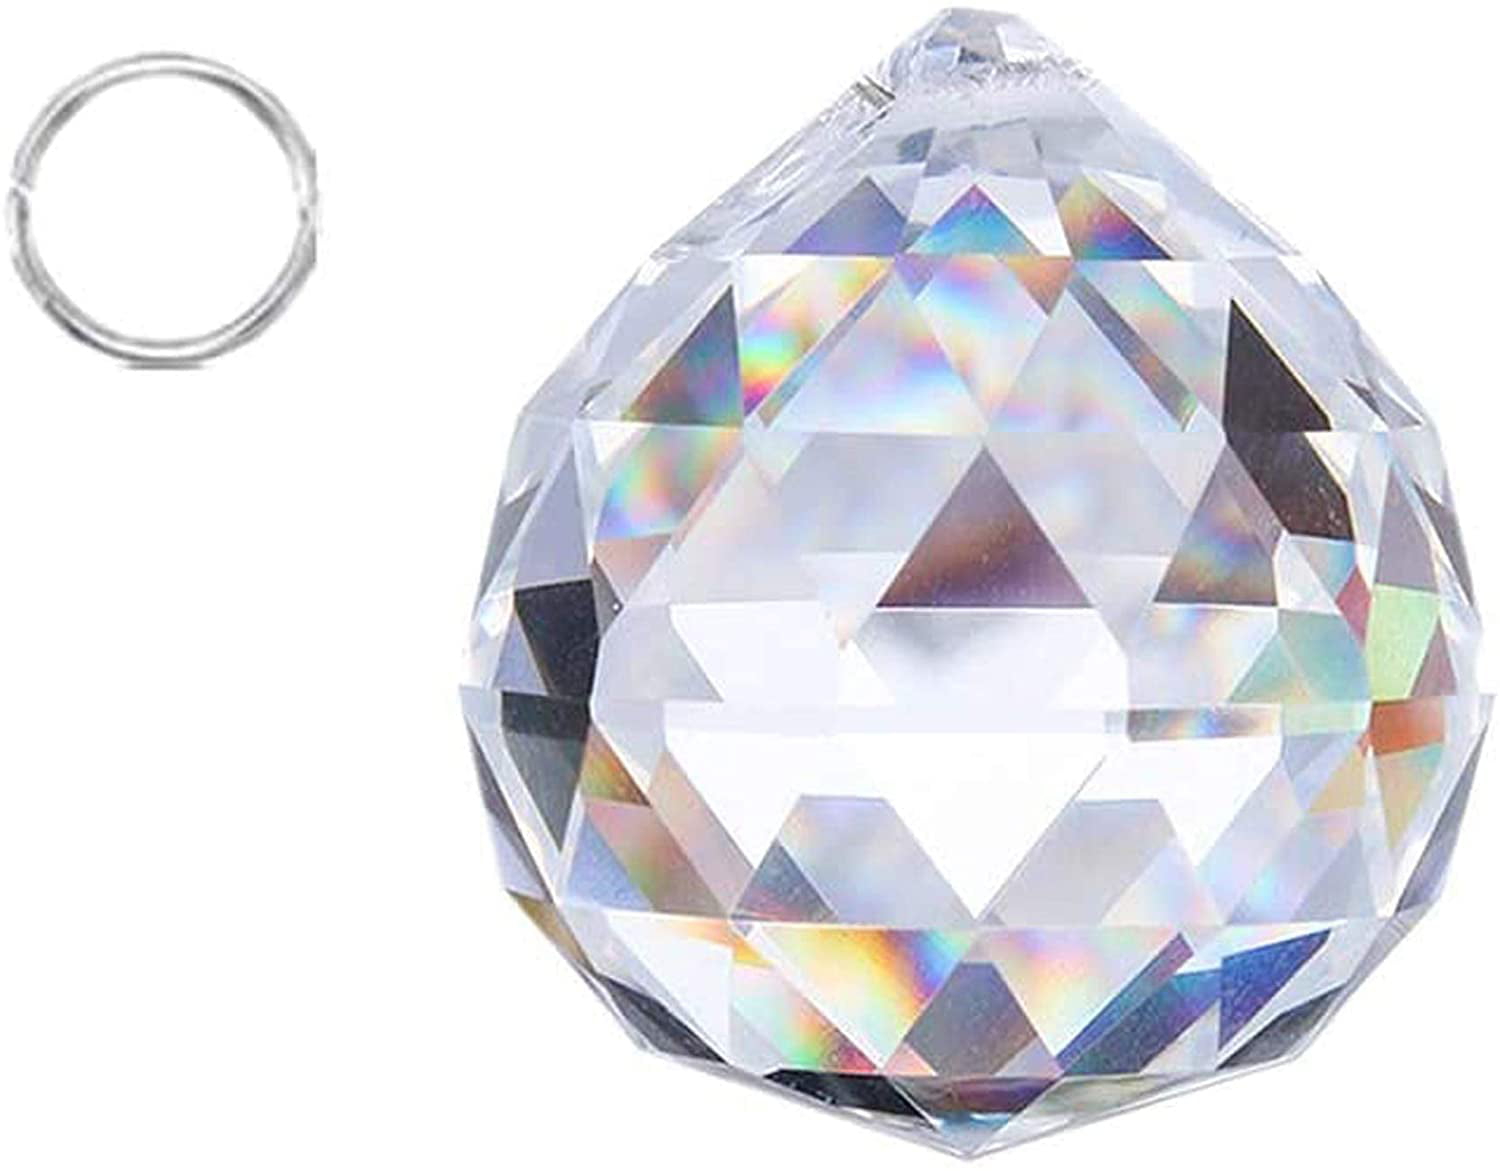 H&D 30mm Crystal Ball Prism Lighting Pendant Part Glass Lamp Chandelier in stock 